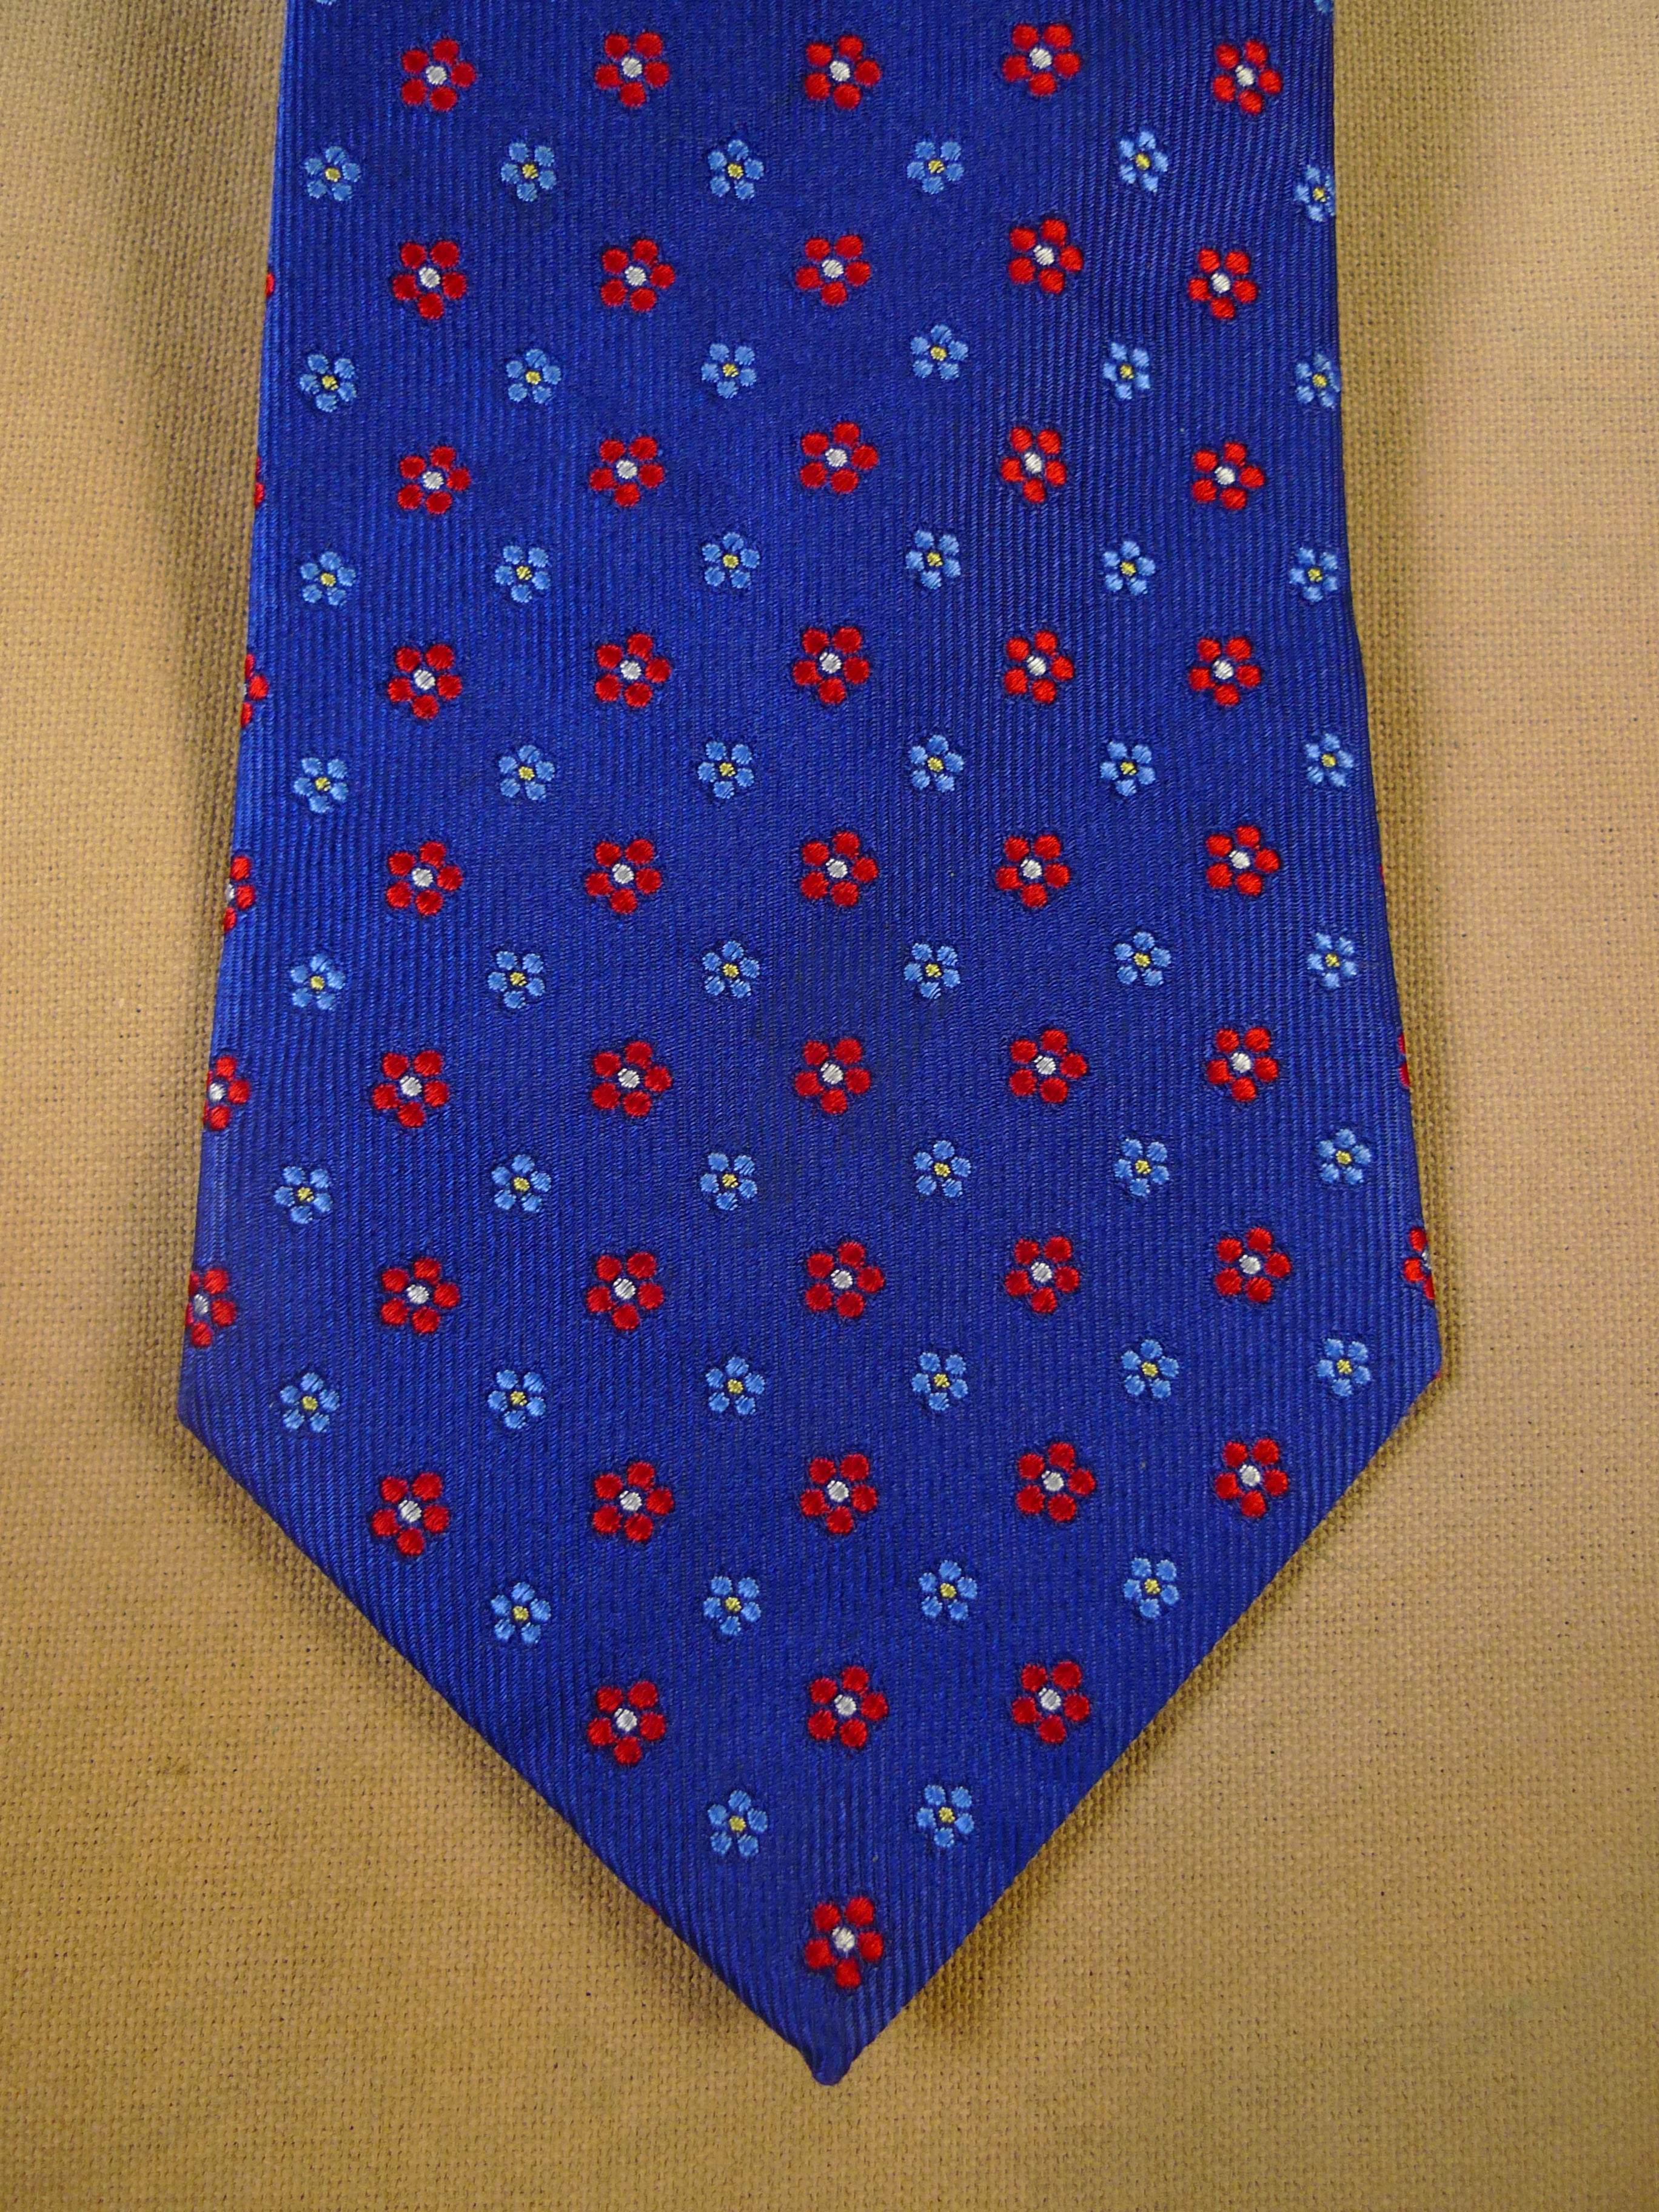 24/0103 immaculate turnbull & asser blue red floral pattern 100% silk tie